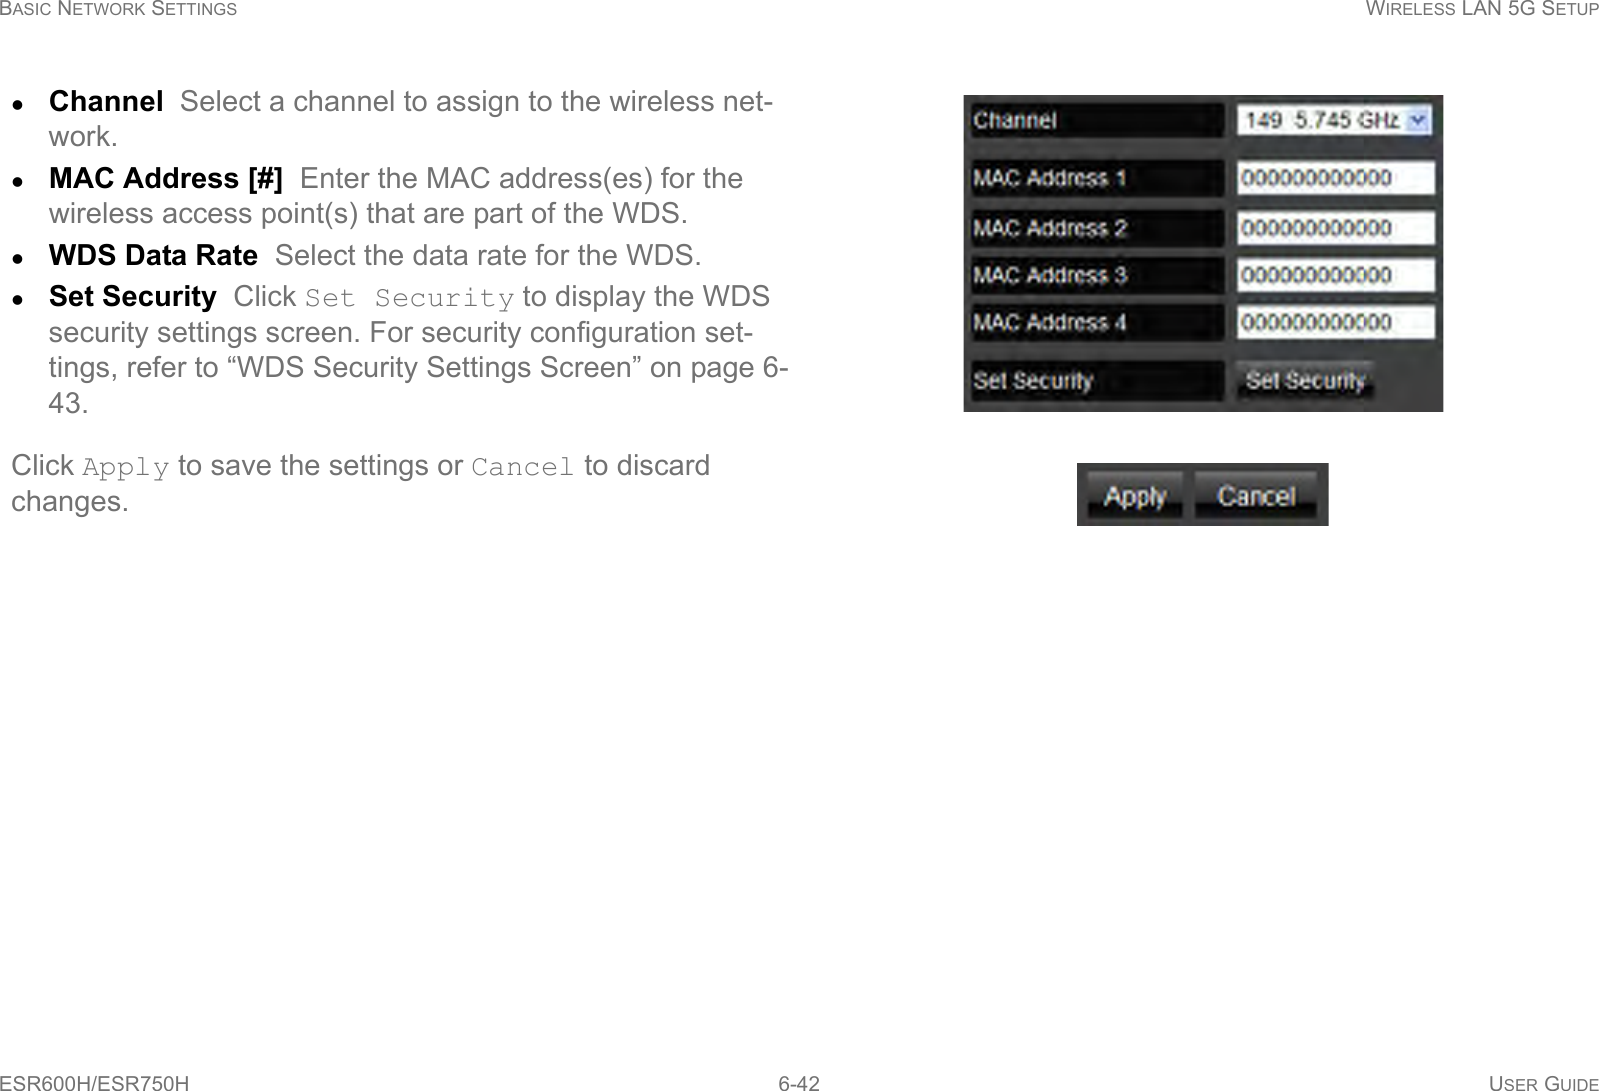 BASIC NETWORK SETTINGS WIRELESS LAN 5G SETUPESR600H/ESR750H 6-42 USER GUIDEChannel  Select a channel to assign to the wireless net-work.MAC Address [#]  Enter the MAC address(es) for the wireless access point(s) that are part of the WDS.WDS Data Rate  Select the data rate for the WDS.Set Security  Click Set Security to display the WDS security settings screen. For security configuration set-tings, refer to “WDS Security Settings Screen” on page 6-43.Click Apply to save the settings or Cancel to discard changes.